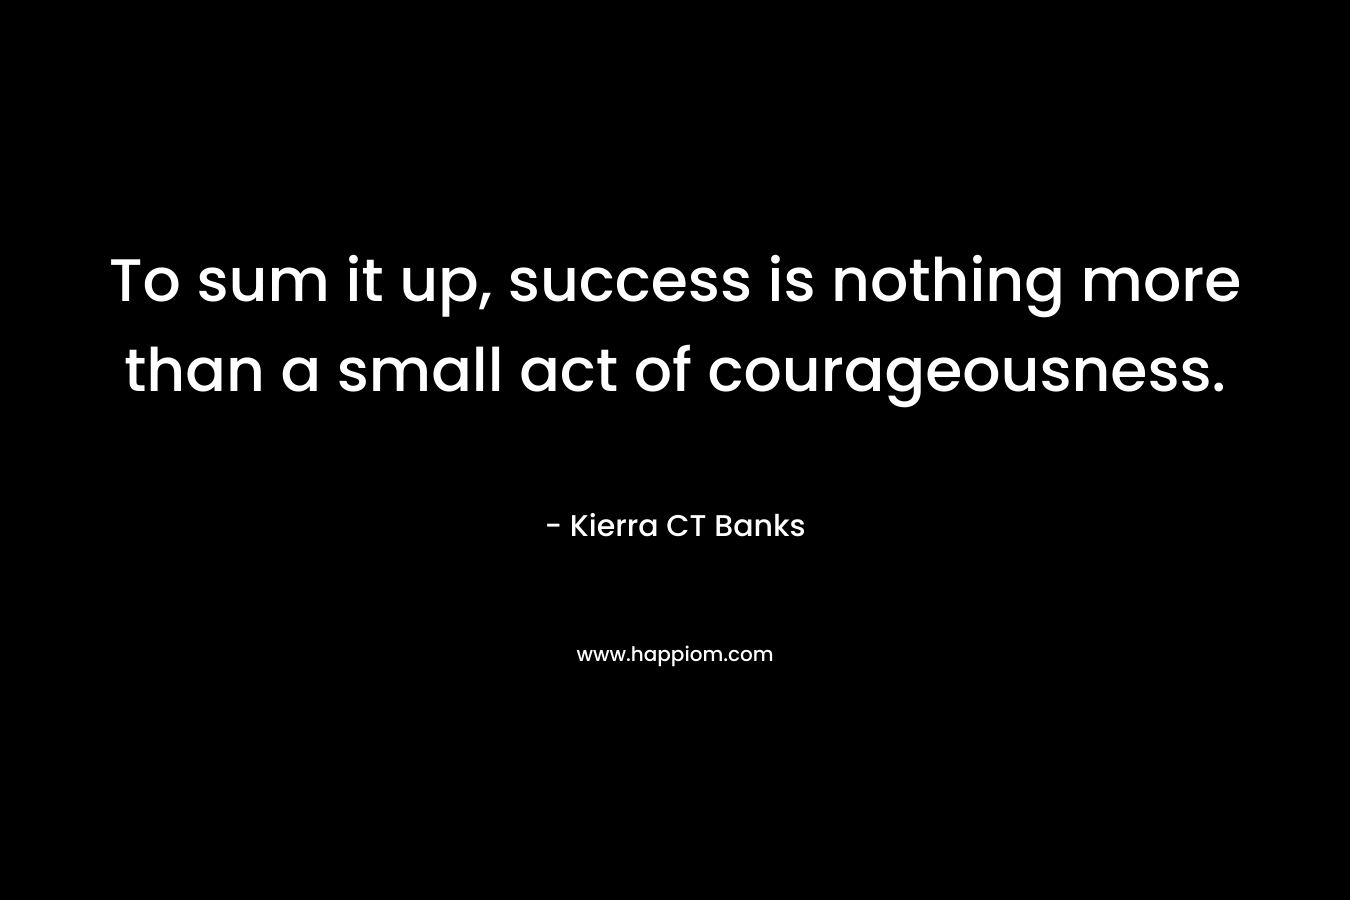 To sum it up, success is nothing more than a small act of courageousness. – Kierra CT Banks